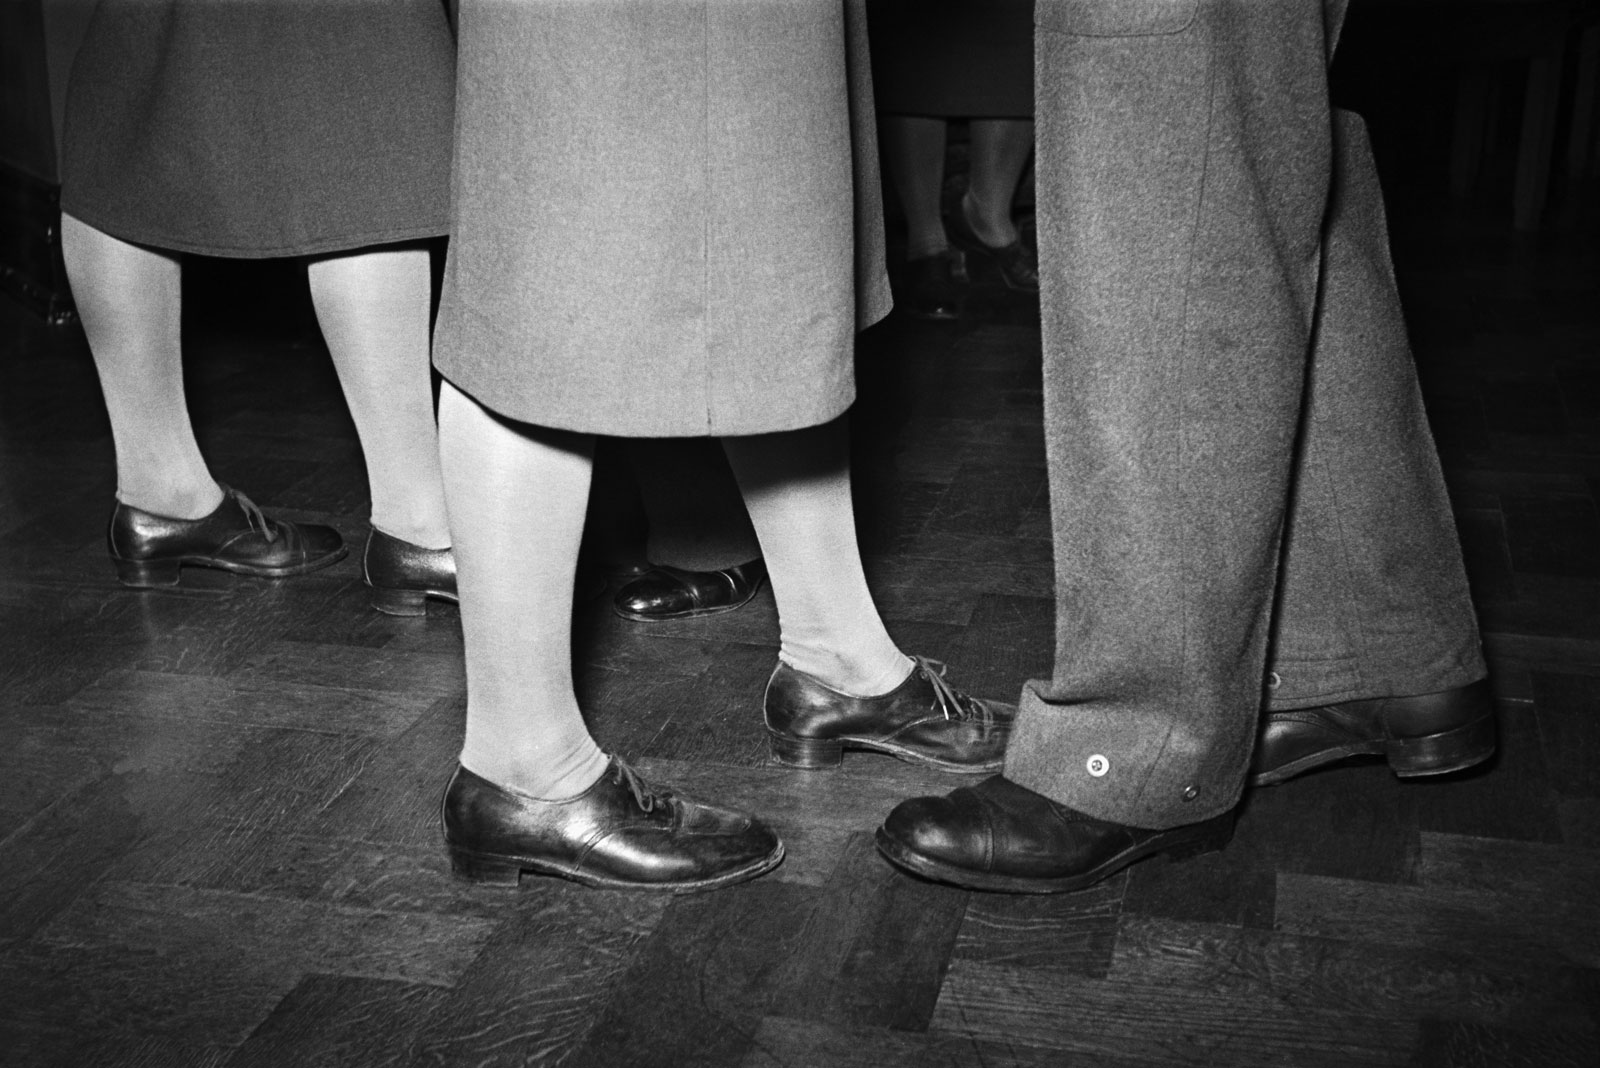 Utility footwear worn on a wartime evening out, London, 1940